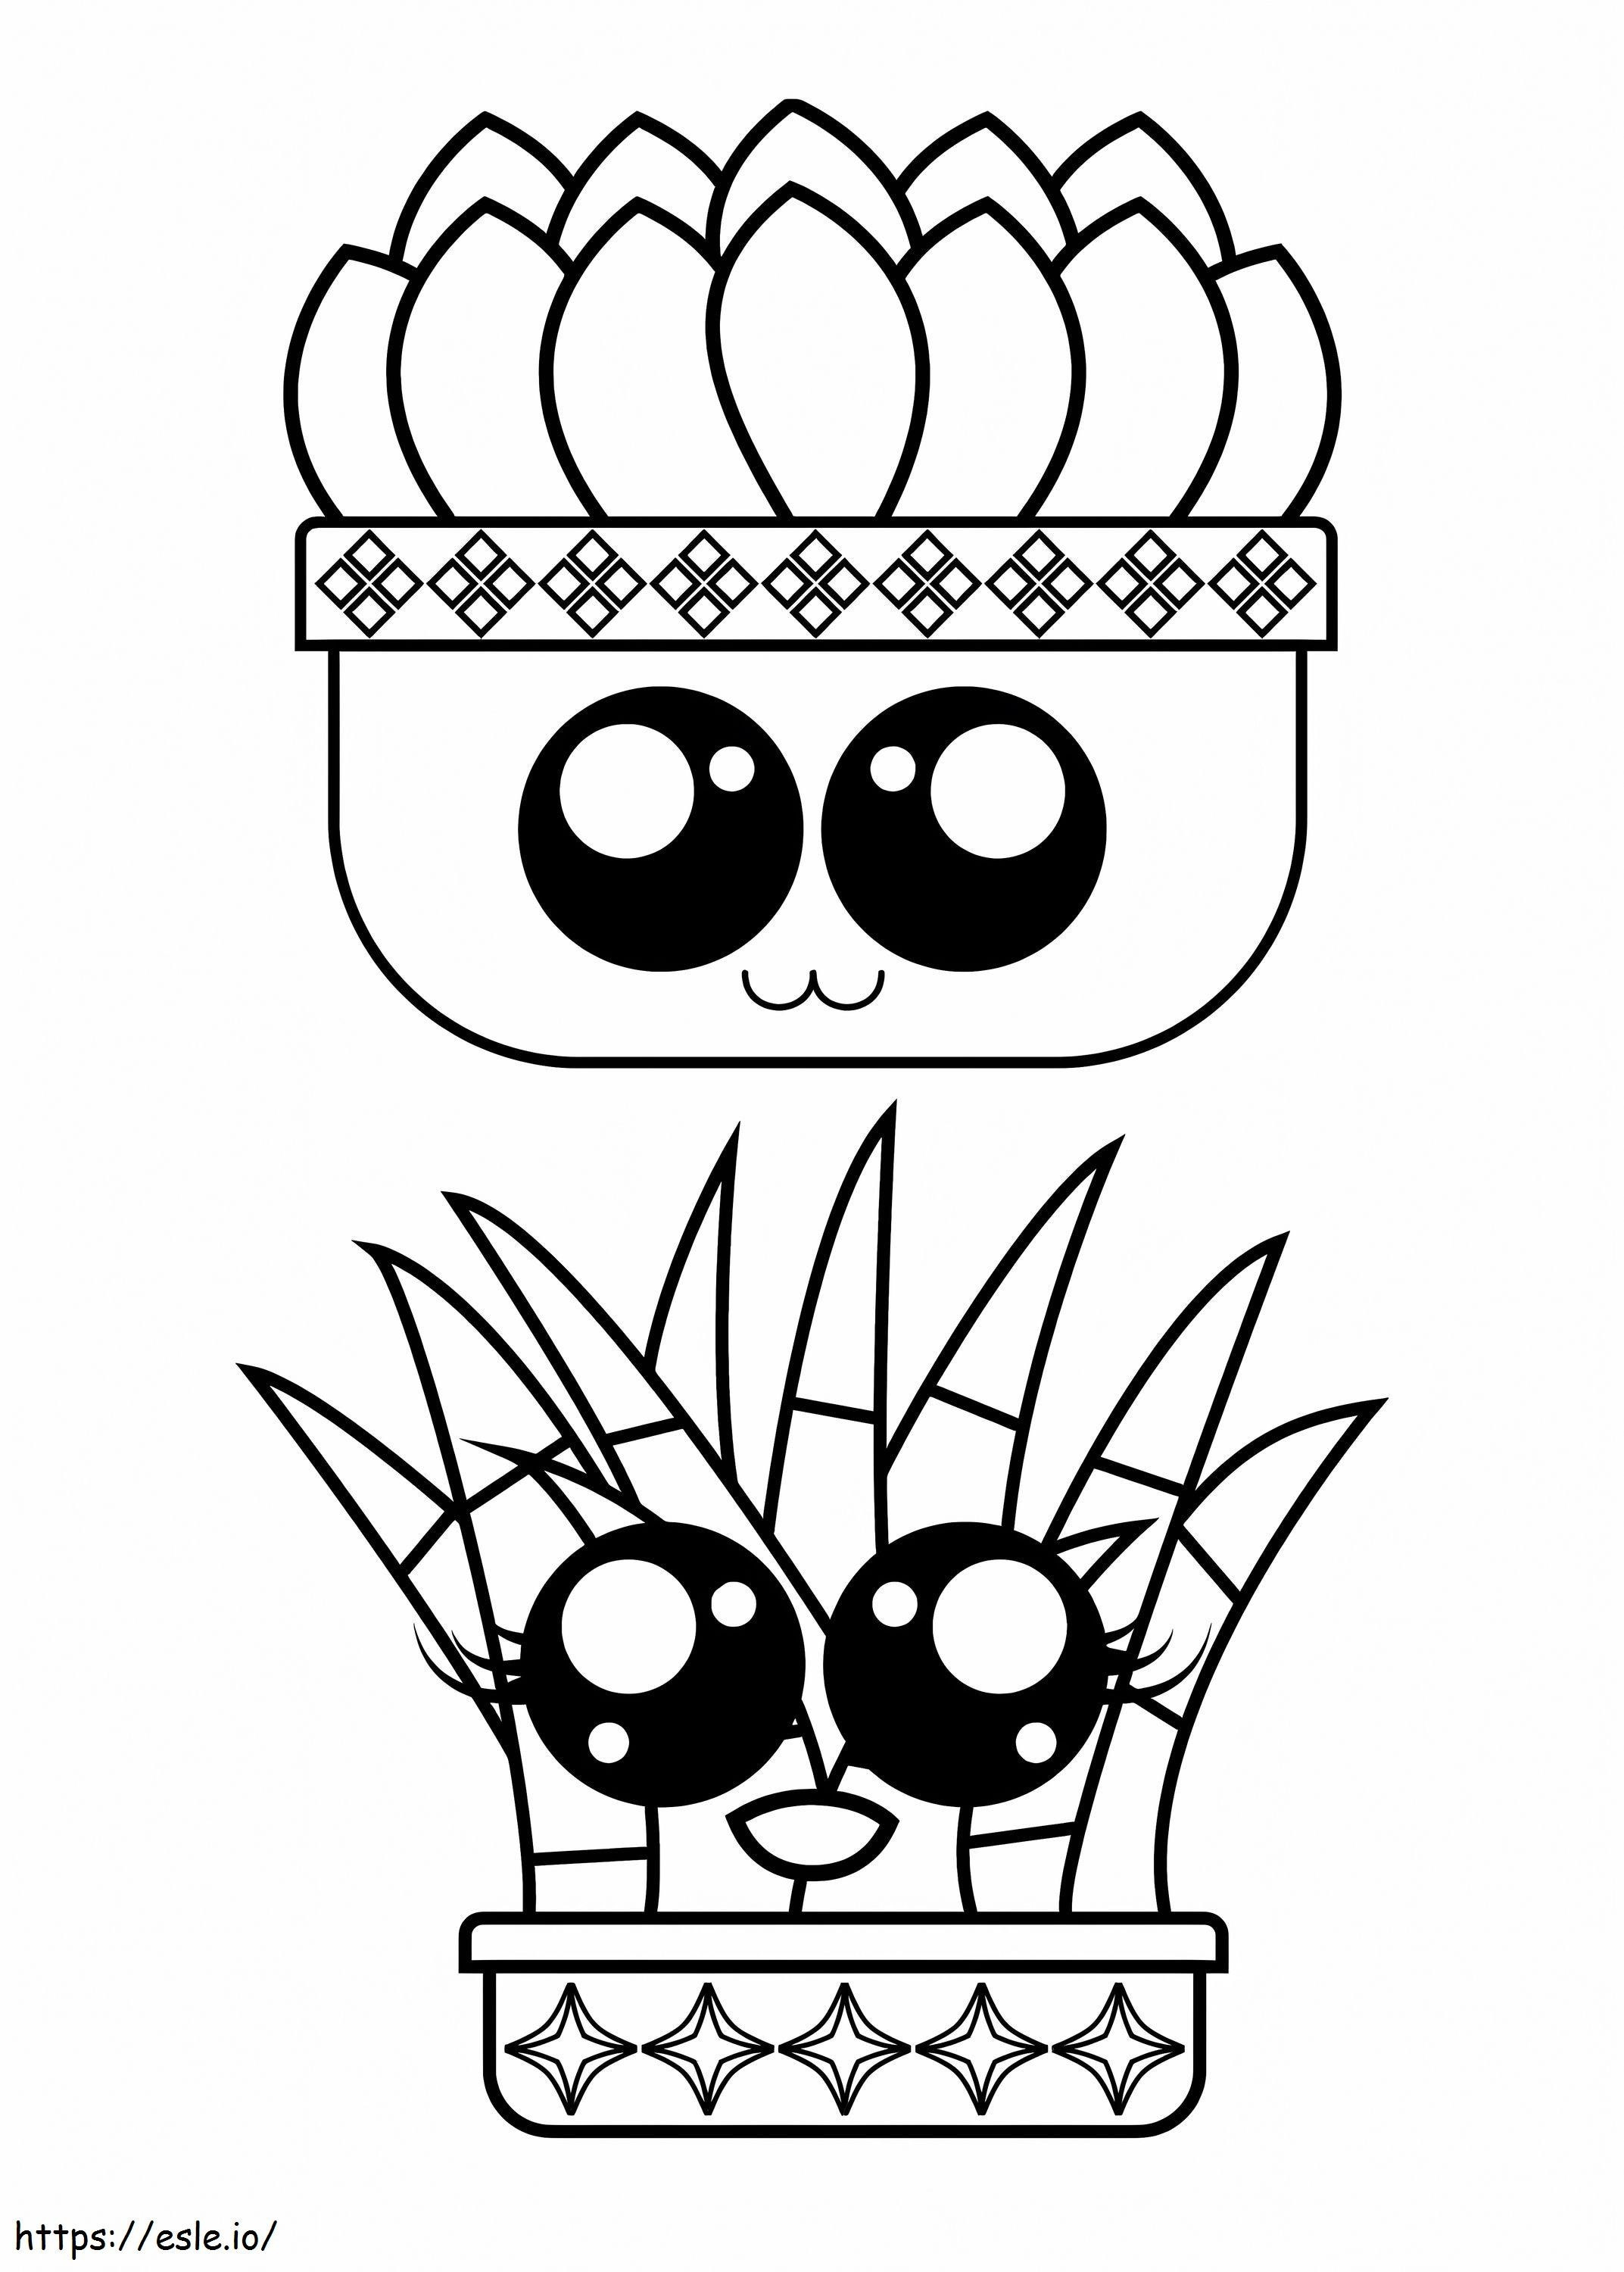 Two Cactus In Pot Kawaii coloring page